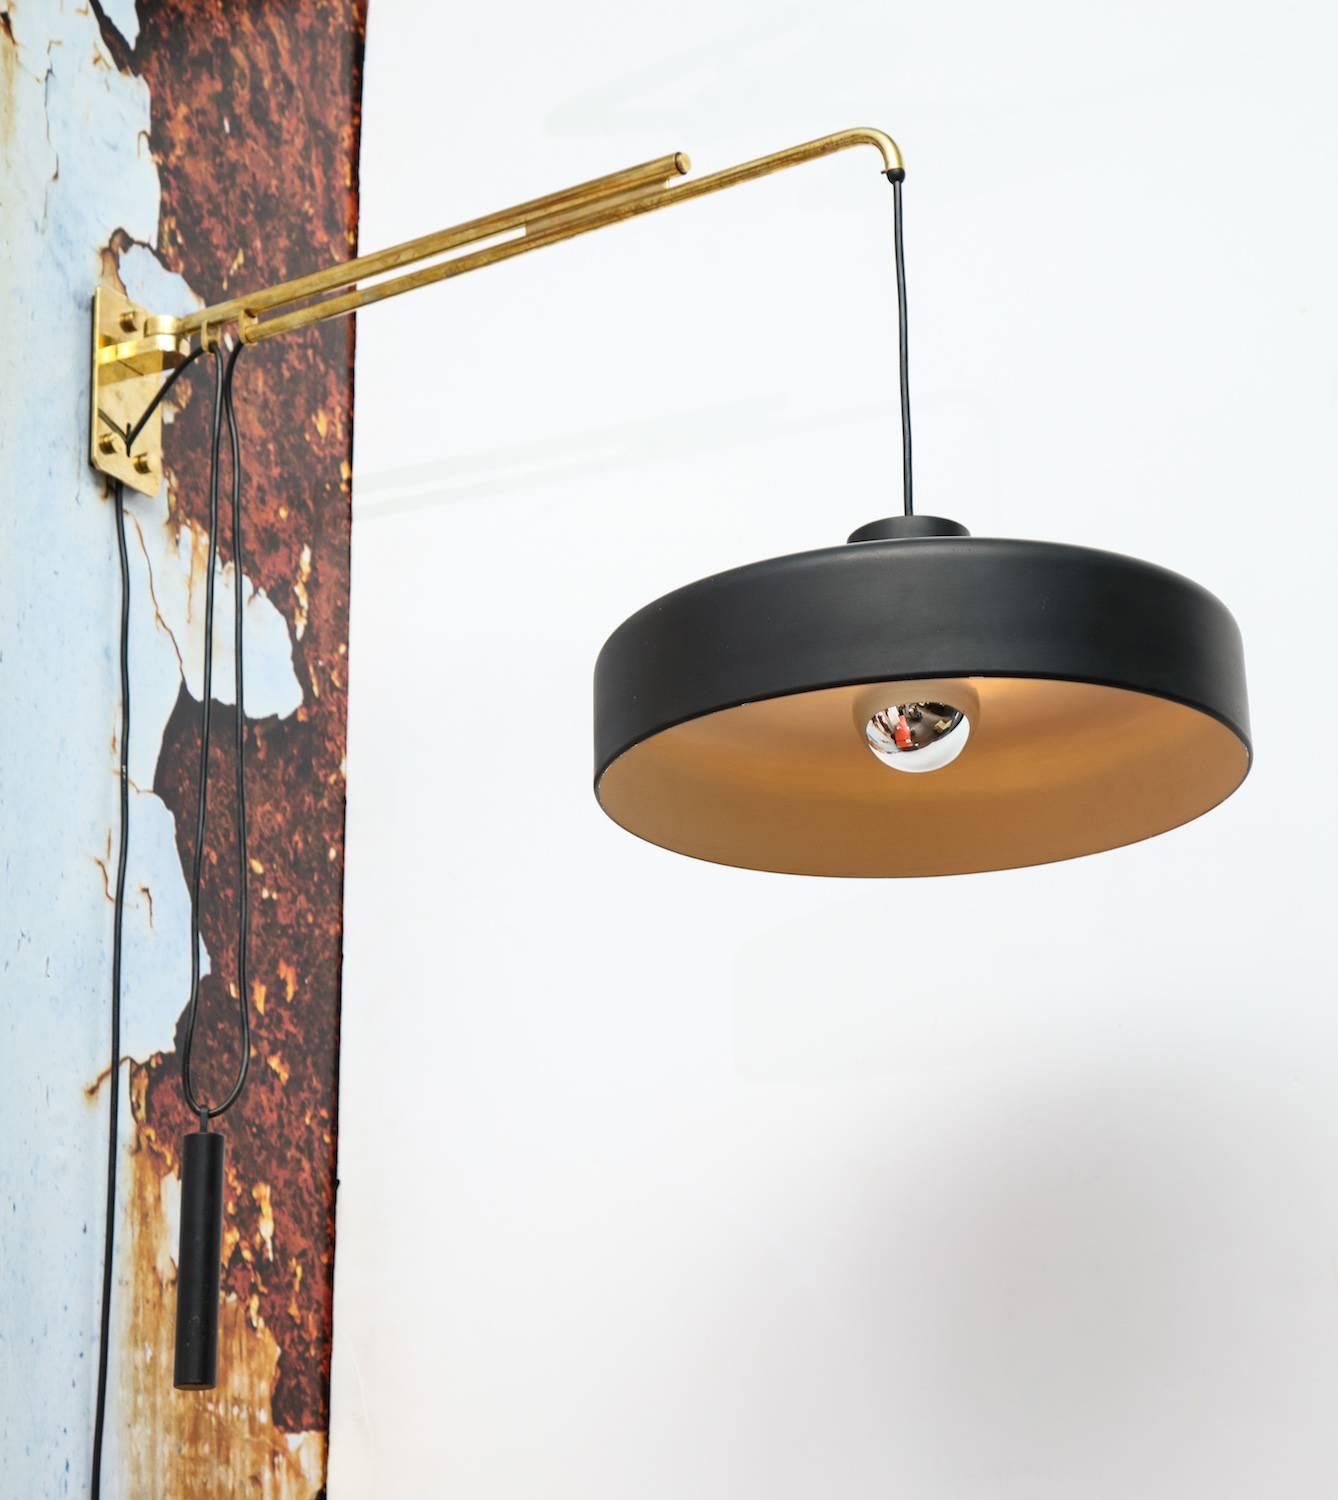 Adjustable sconce #149/N by Gino Sarfatti for Arteluce. Brass wall mount and extended arm. Black painted metal shade and counter weight. Height can be adjusted and arm moves from side to side. Manufacturers label on inside of shade.